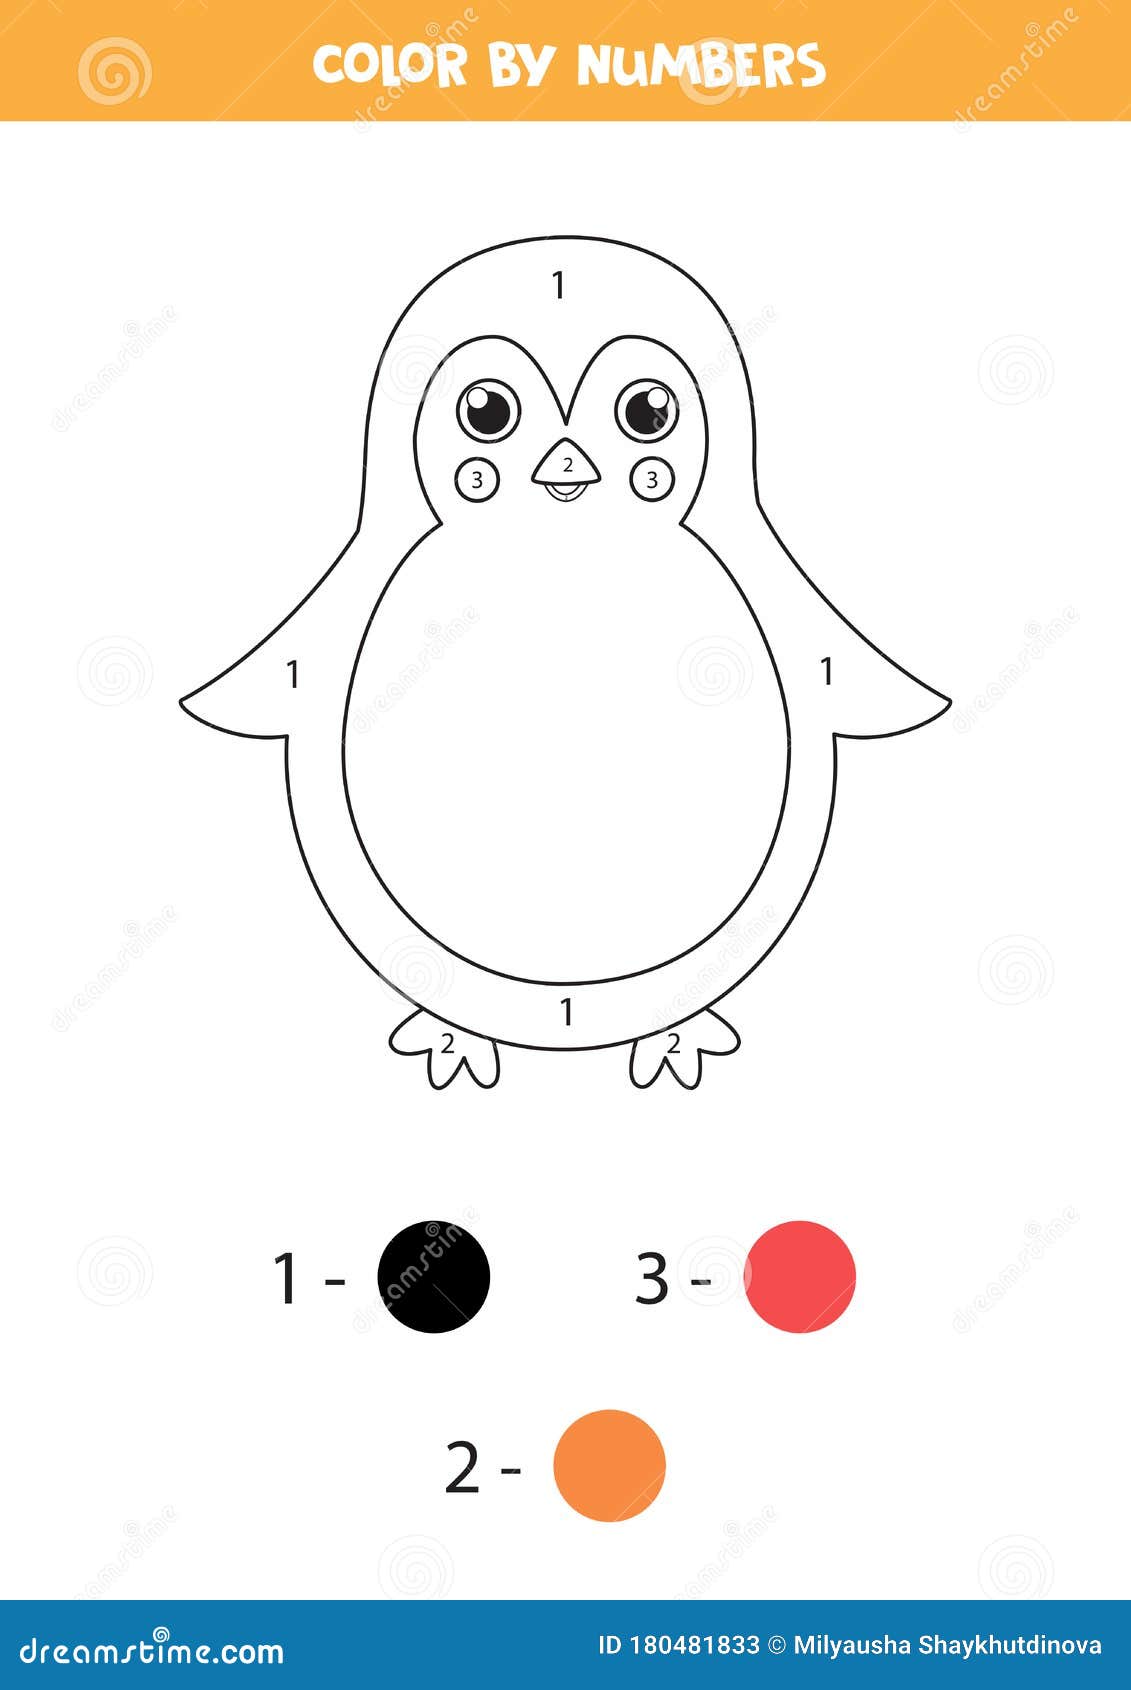 coloring-page-by-numbers-with-cute-cartoon-penguin-stock-vector-illustration-of-kindergarten